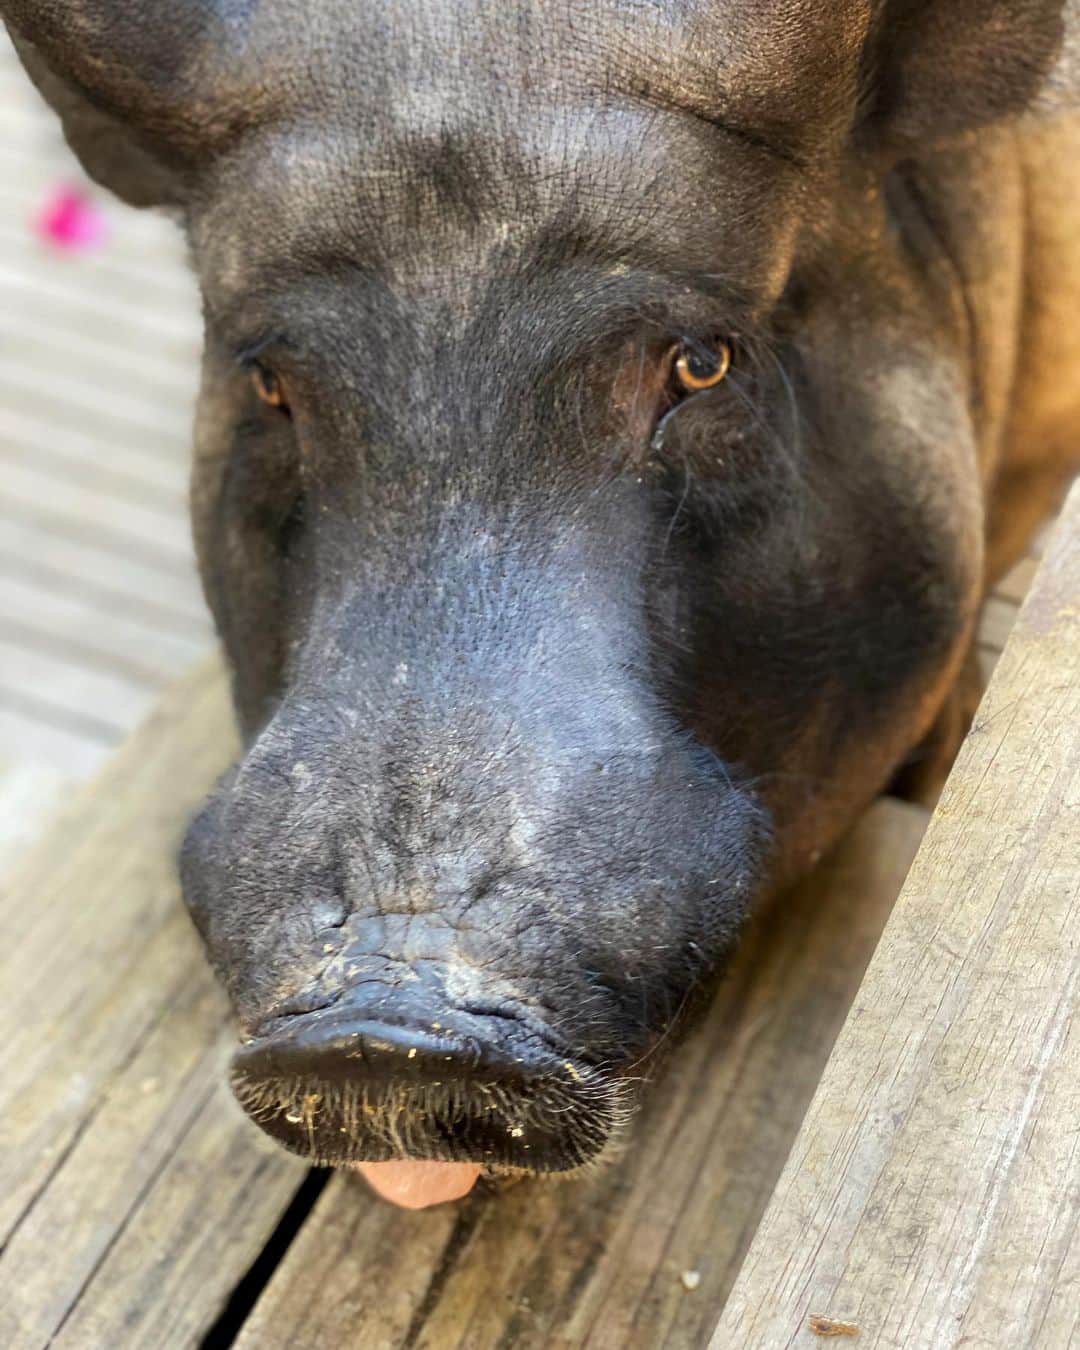 Jamonのインスタグラム：「My brother @nerothepig being cute after removing all the stones from mommy’s garden. I bet he is felling guilty... but not.  #gardening #gardeninginquarentine #jamonthepig #nerothepig #pig #pet #pets #pigs #pigsofinstagram #pigsaspets」